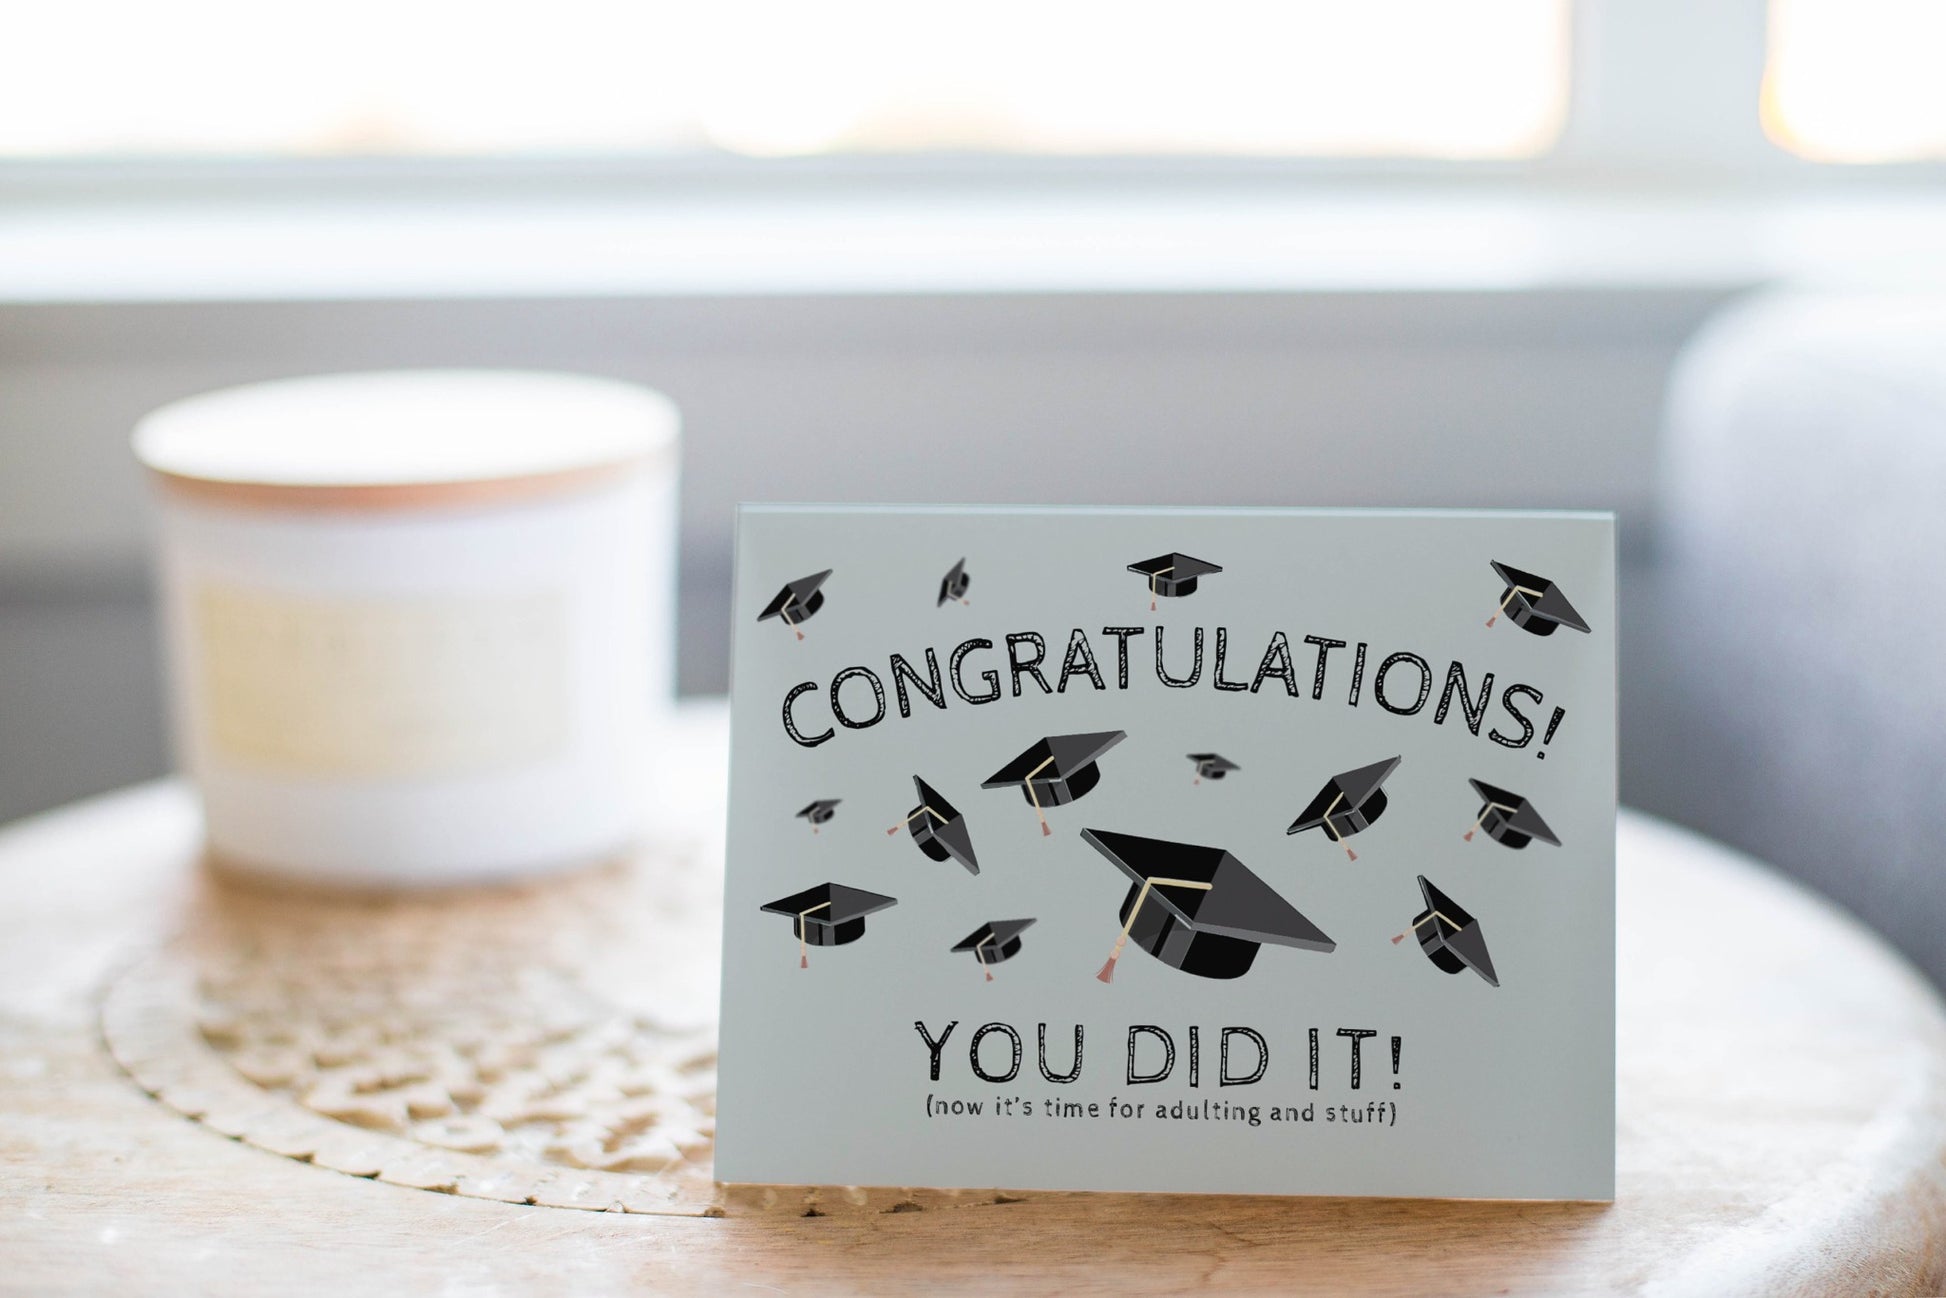 Congratulations, You Did It! - Greeting Card.